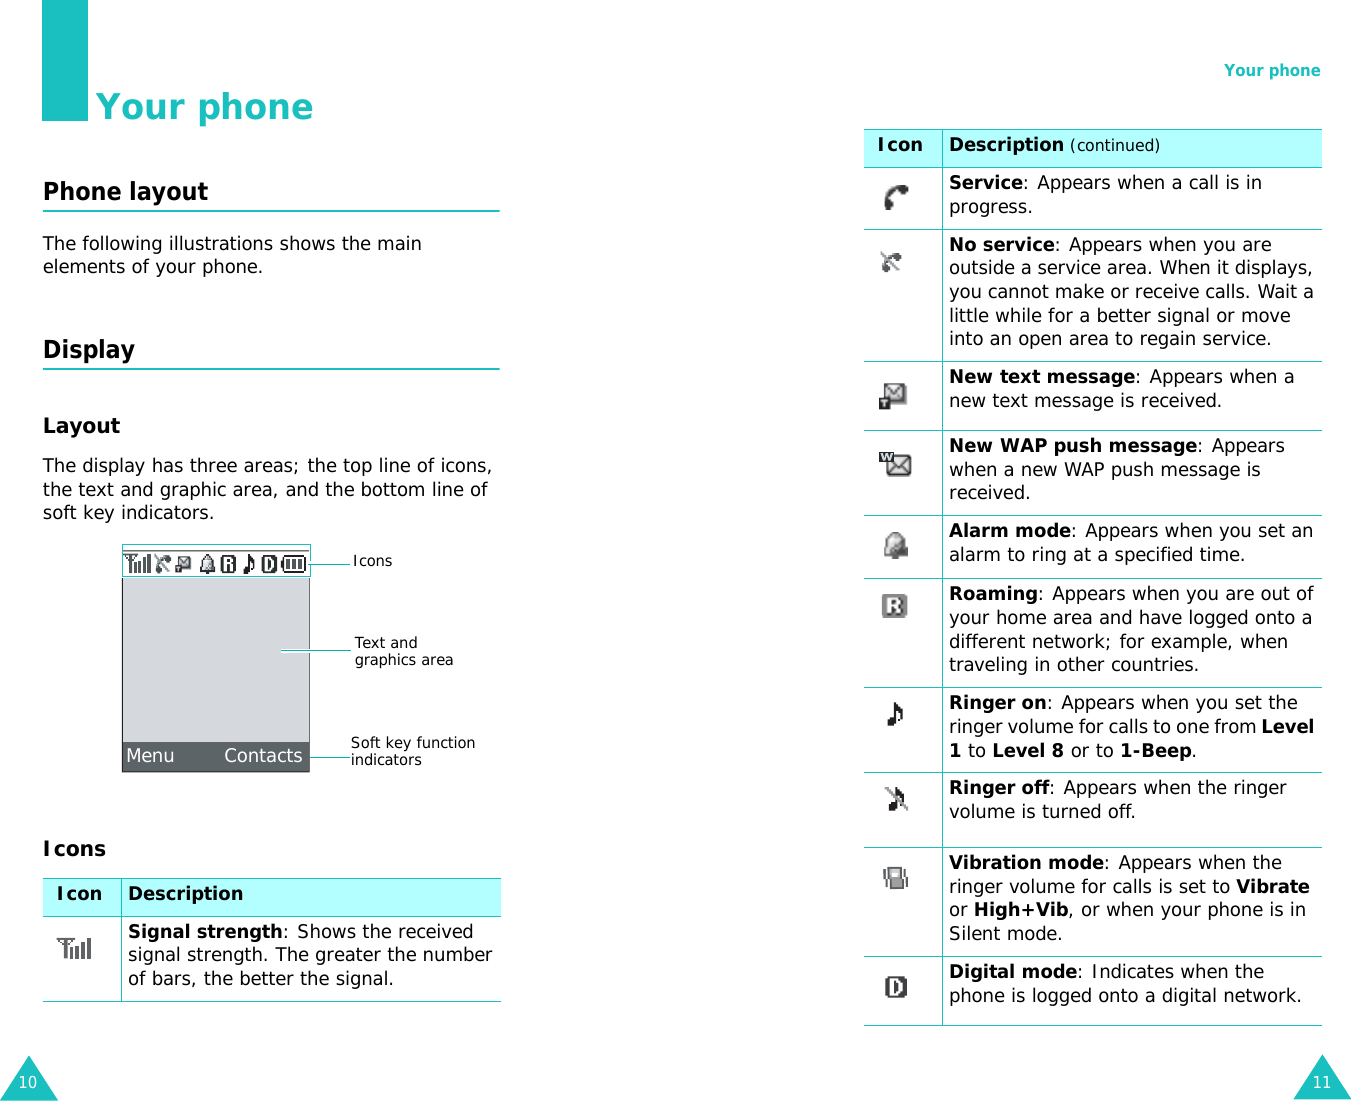 10Your phonePhone layoutThe following illustrations shows the main elements of your phone.DisplayLayoutThe display has three areas; the top line of icons, the text and graphic area, and the bottom line of soft key indicators.IconsIcon Description Signal strength: Shows the received signal strength. The greater the number of bars, the better the signal.IconsText and graphics areaMenu        ContactsSoft key function indicatorsYour phone11Service: Appears when a call is in progress.No service: Appears when you are outside a service area. When it displays, you cannot make or receive calls. Wait a little while for a better signal or move into an open area to regain service.New text message: Appears when a new text message is received.New WAP push message: Appears when a new WAP push message is received.Alarm mode: Appears when you set an alarm to ring at a specified time.Roaming: Appears when you are out of your home area and have logged onto a different network; for example, when traveling in other countries.Ringer on: Appears when you set the ringer volume for calls to one from Level 1 to Level 8 or to 1-Beep.Ringer off: Appears when the ringer volume is turned off.Vibration mode: Appears when the ringer volume for calls is set to Vibrate or High+Vib, or when your phone is in Silent mode.Digital mode: Indicates when the phone is logged onto a digital network.Icon Description (continued)